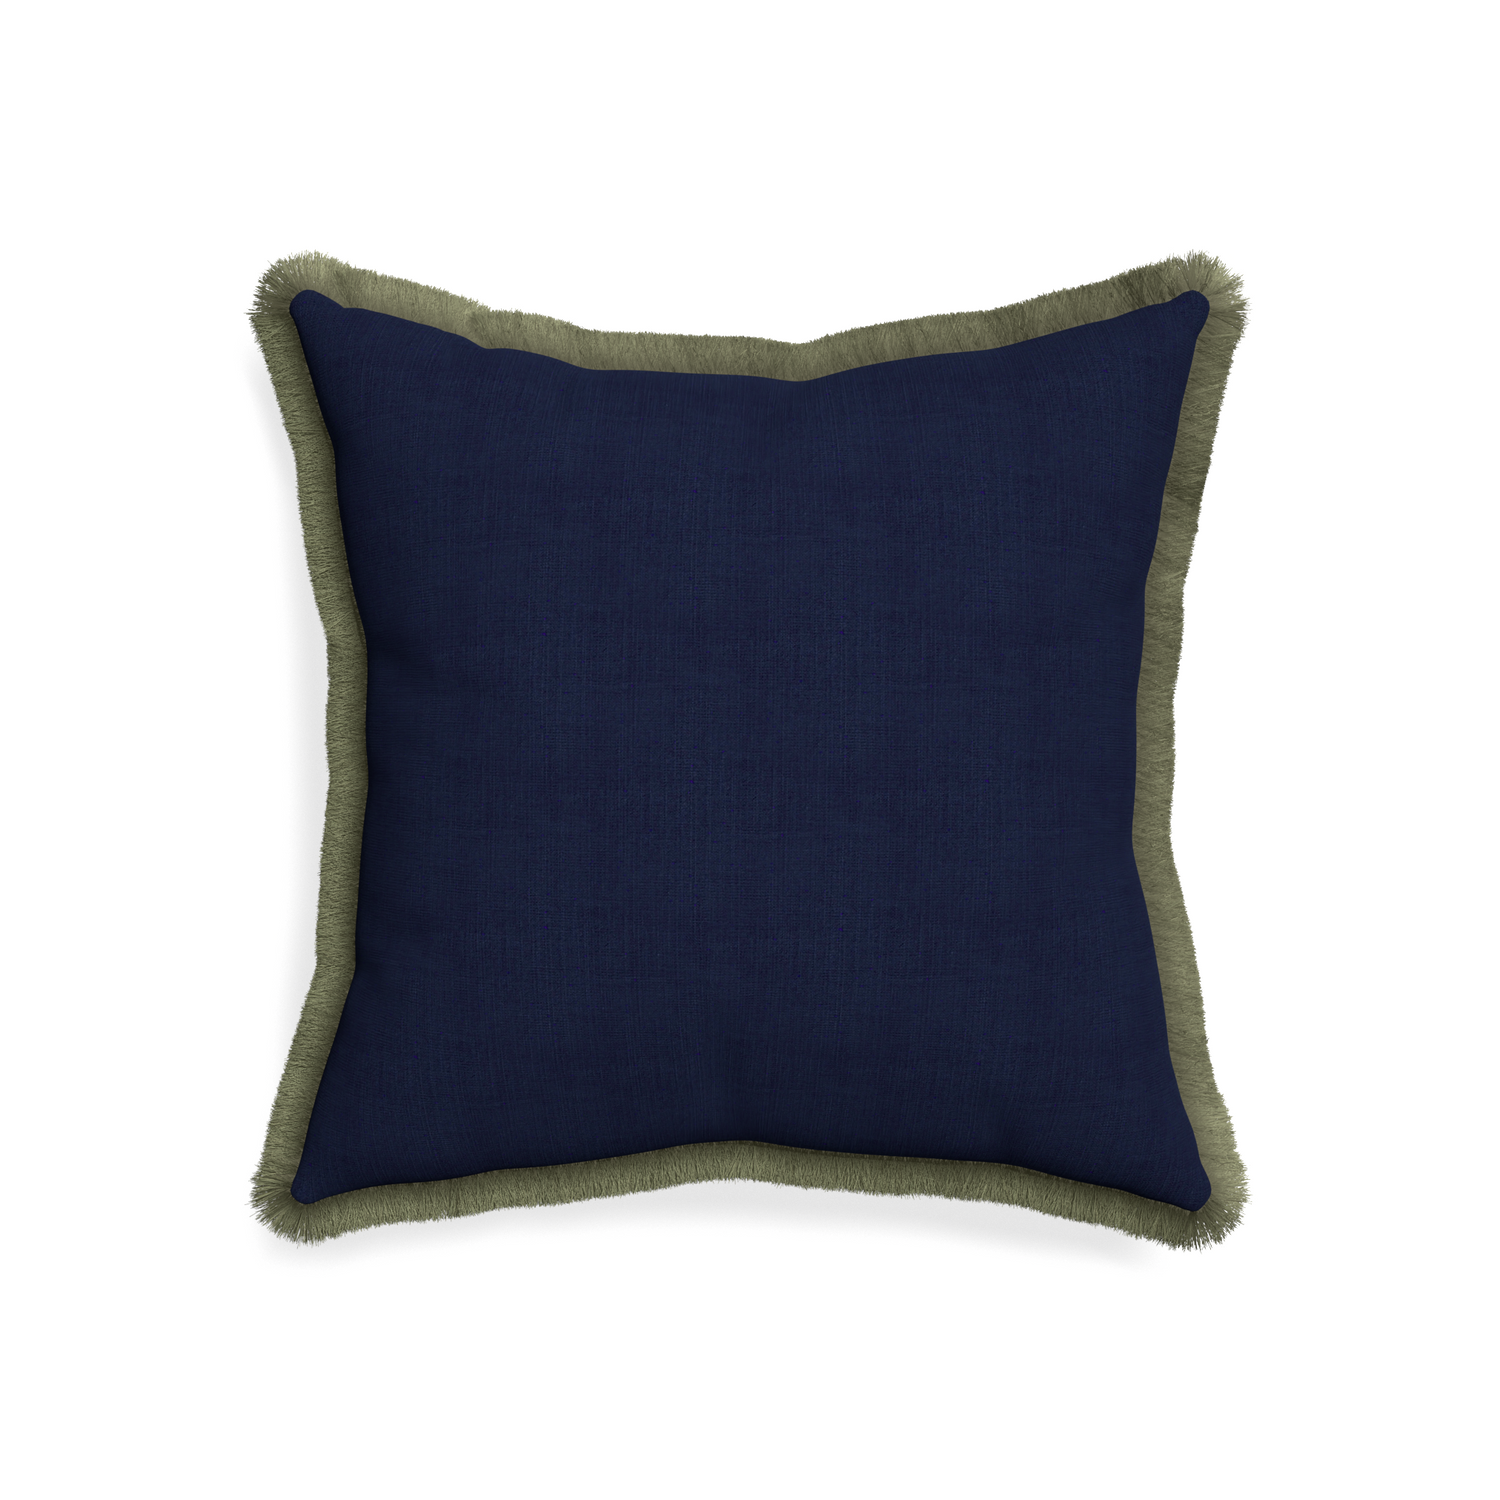 20-square midnight custom navy bluepillow with sage fringe on white background